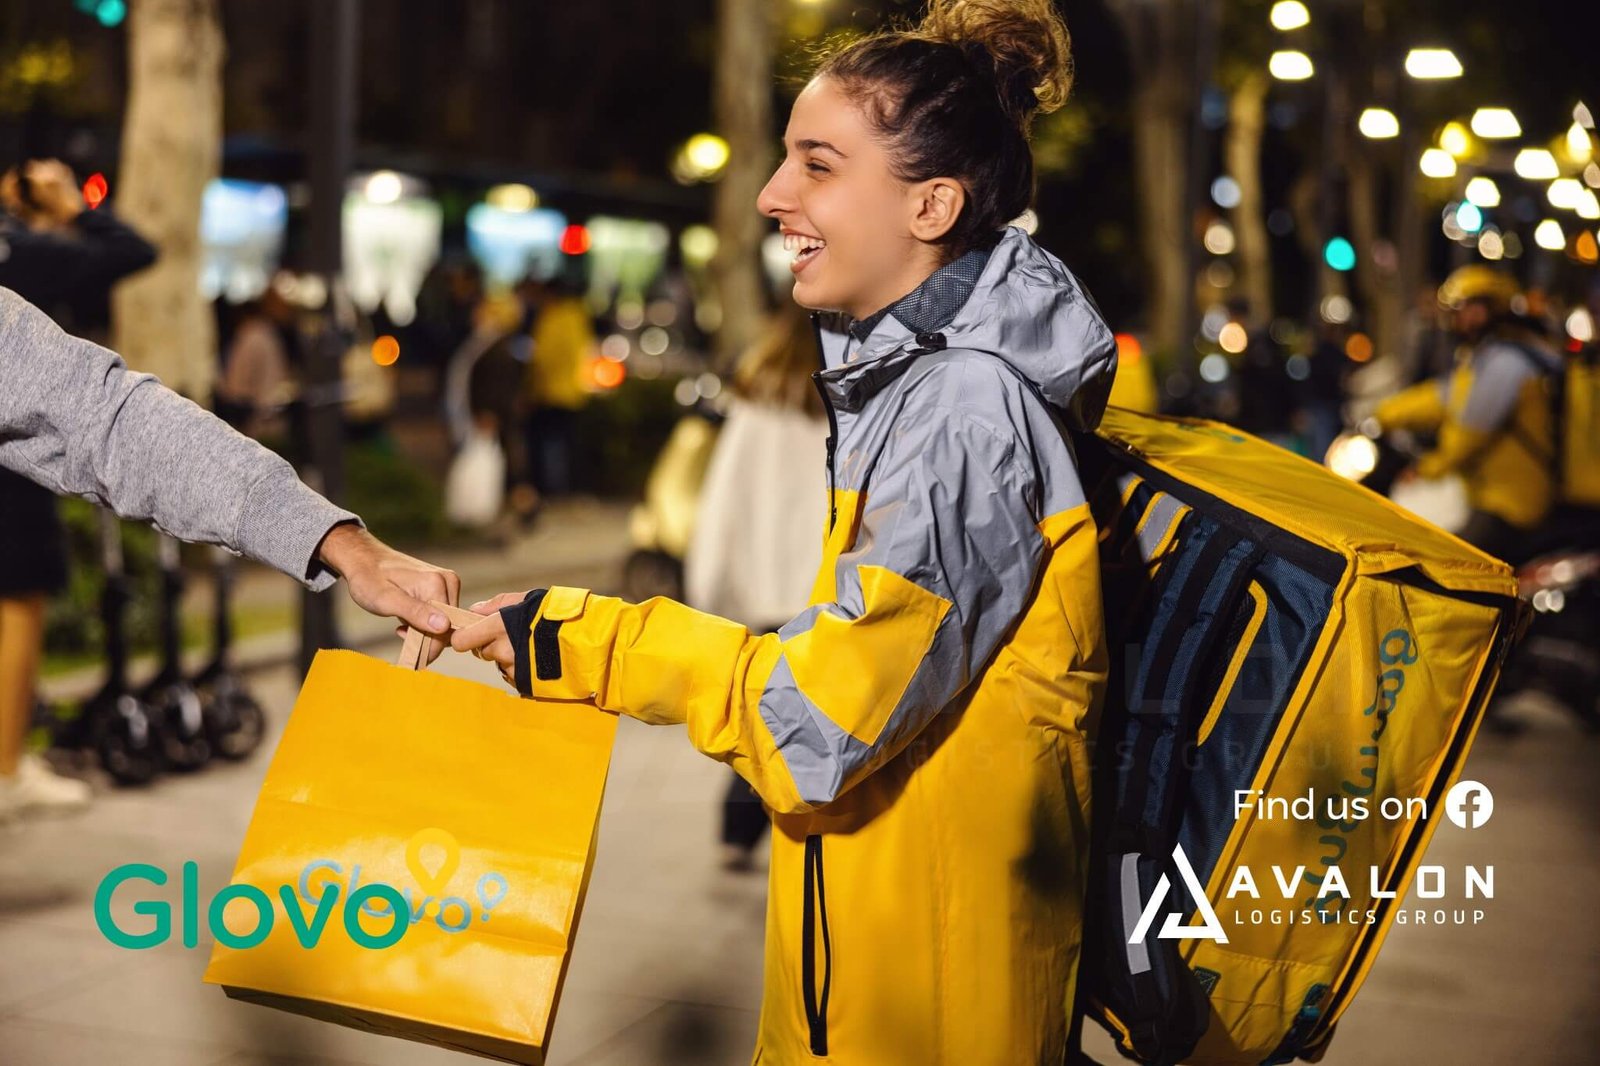 glovo delivery rider delivering groceries at night